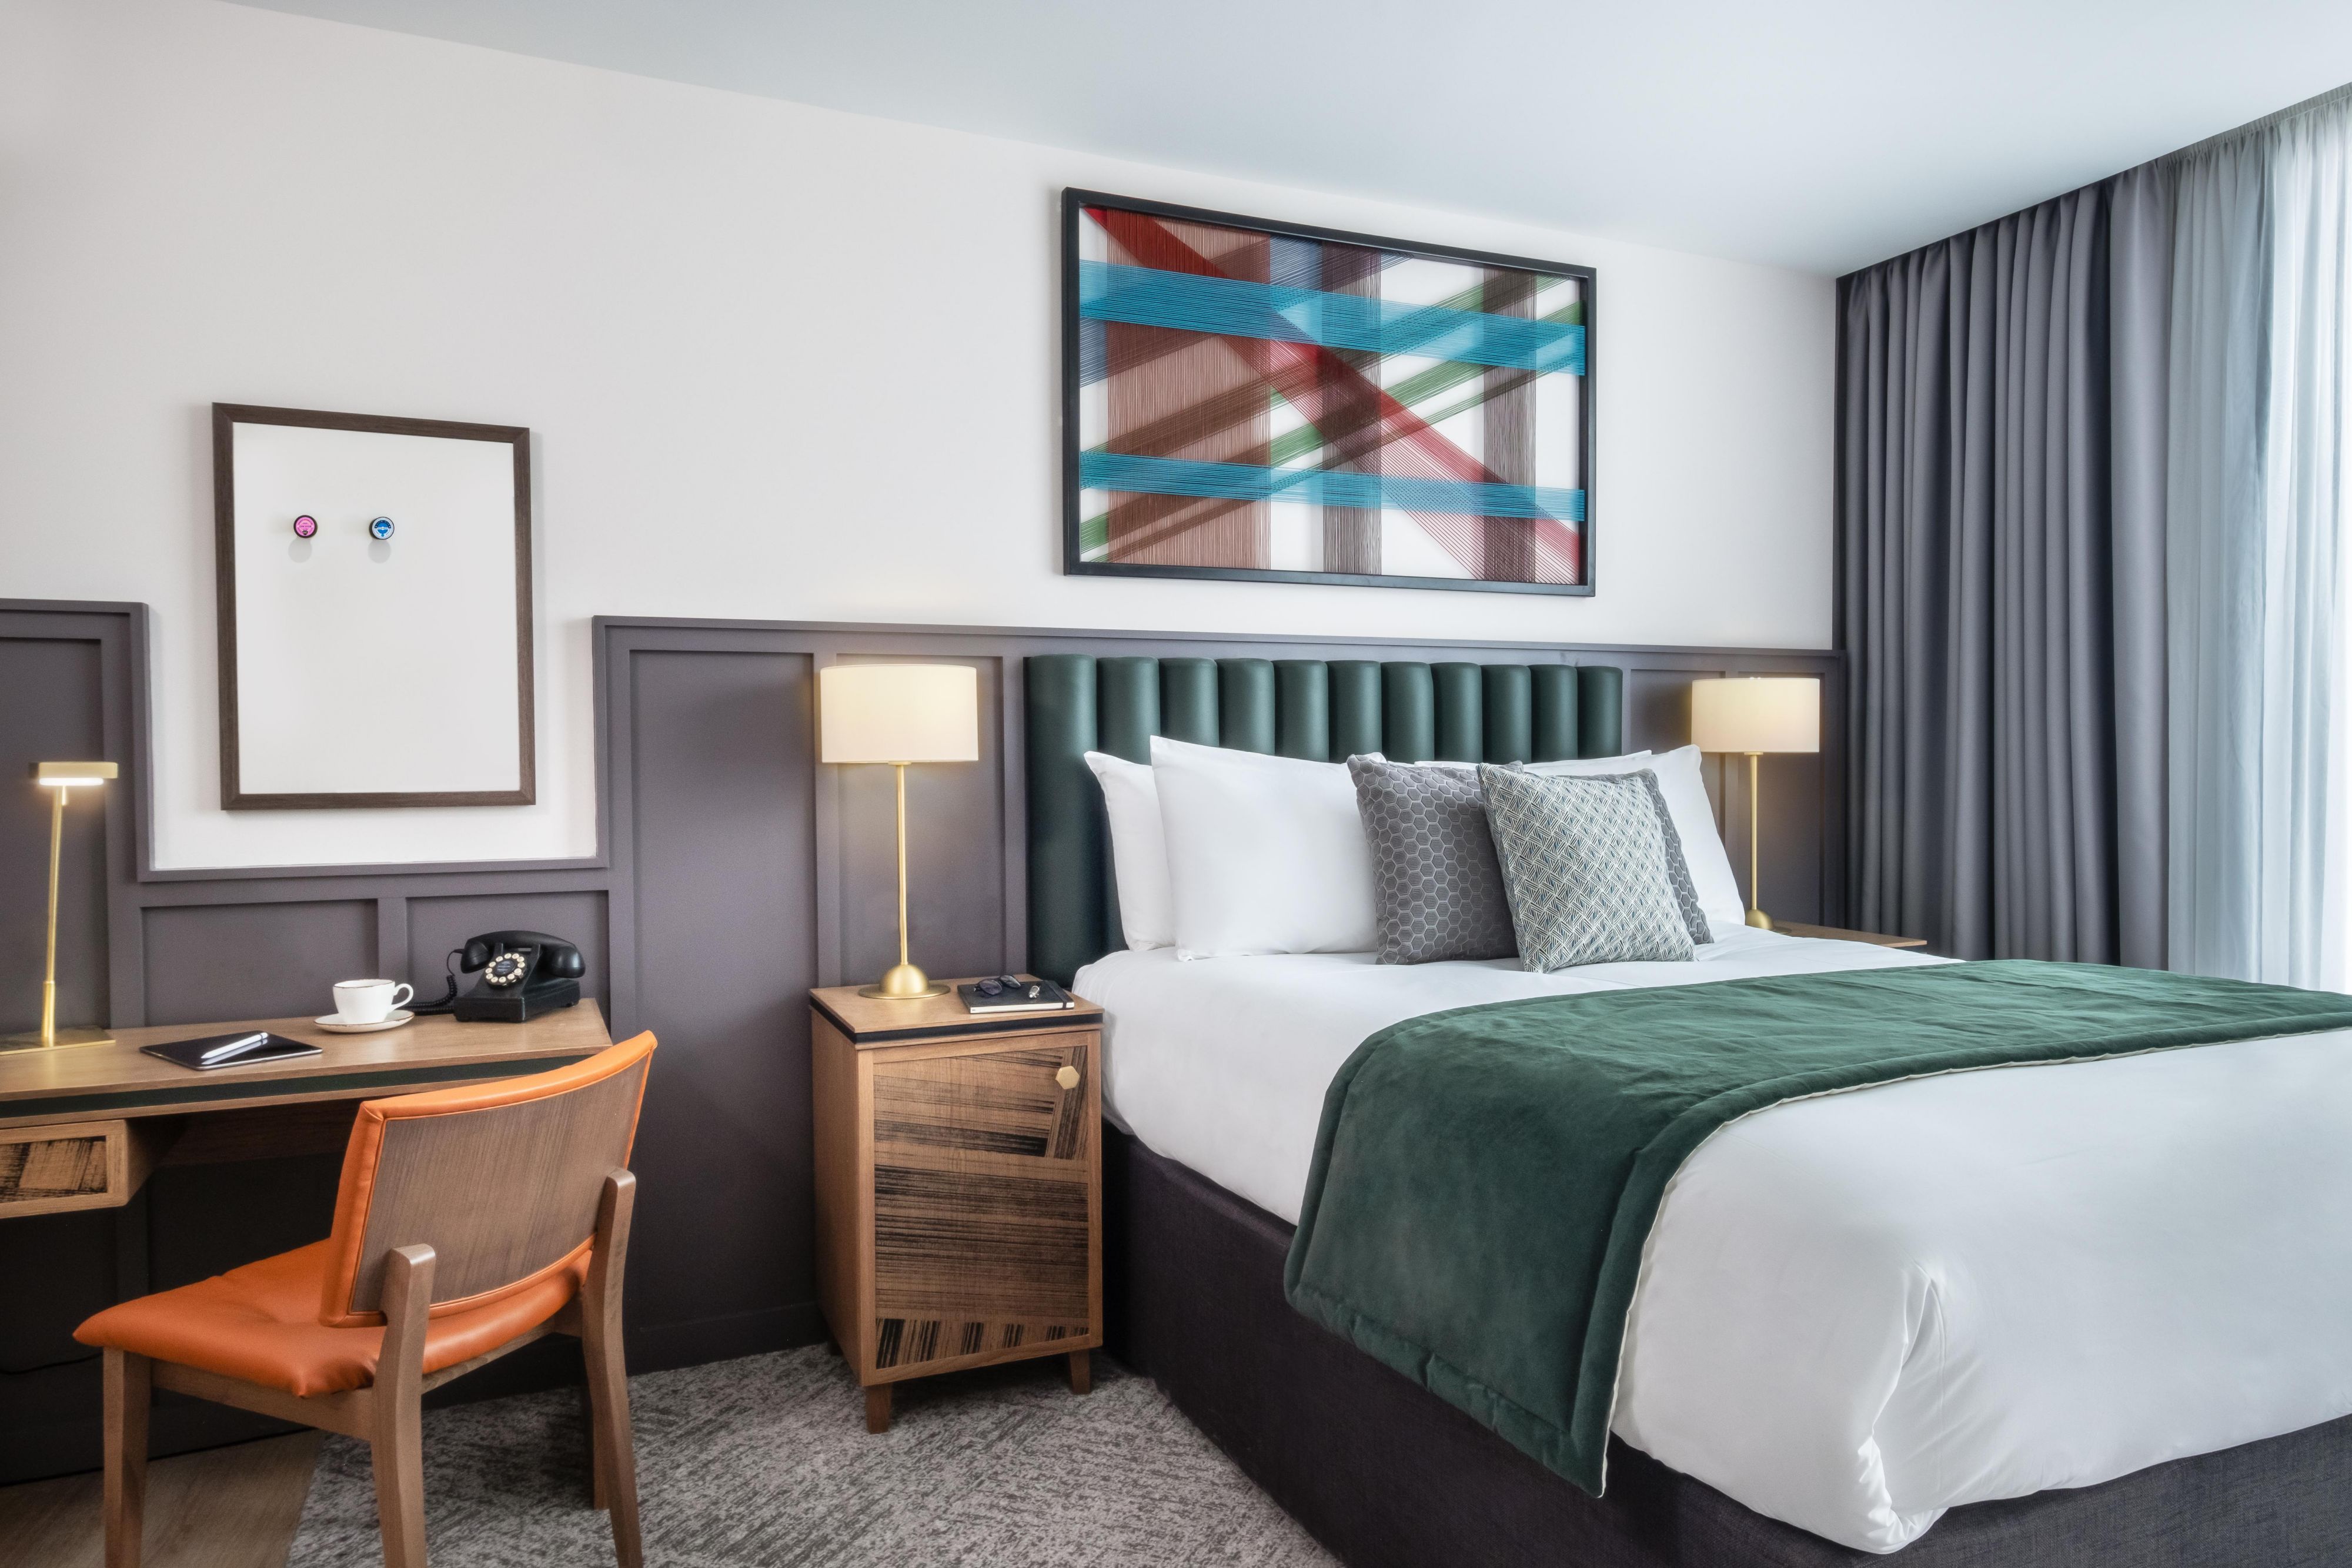 Our distinctively designed, spacious superior rooms introduce textiles and detailing to celebrate Manchester’s creative and industrial heritage.